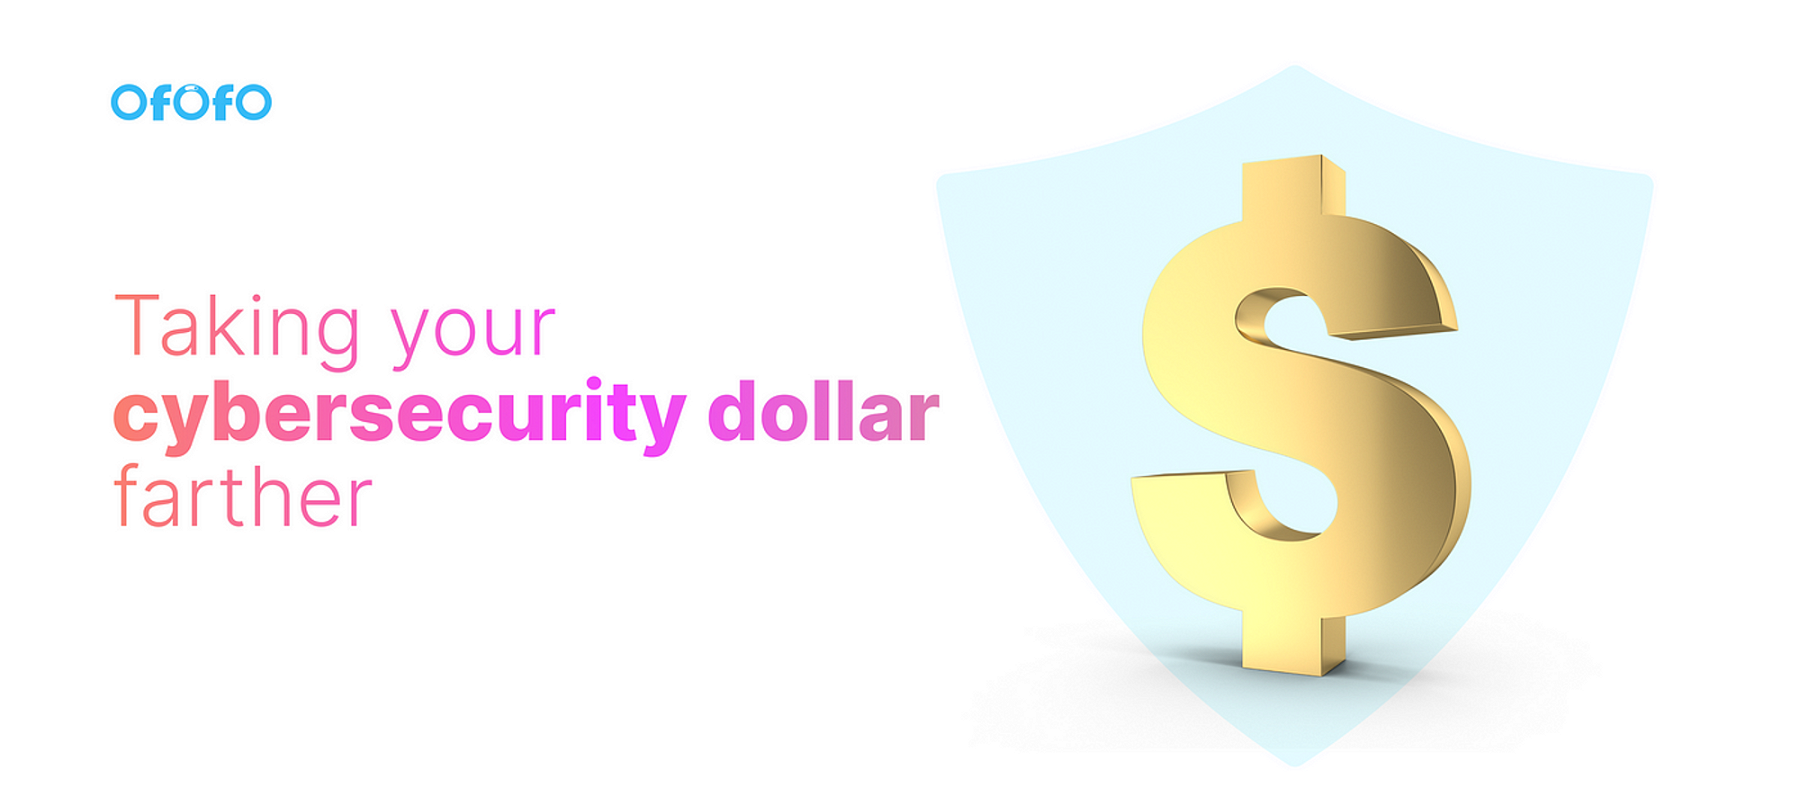 Taking your cybersecurity dollar farther